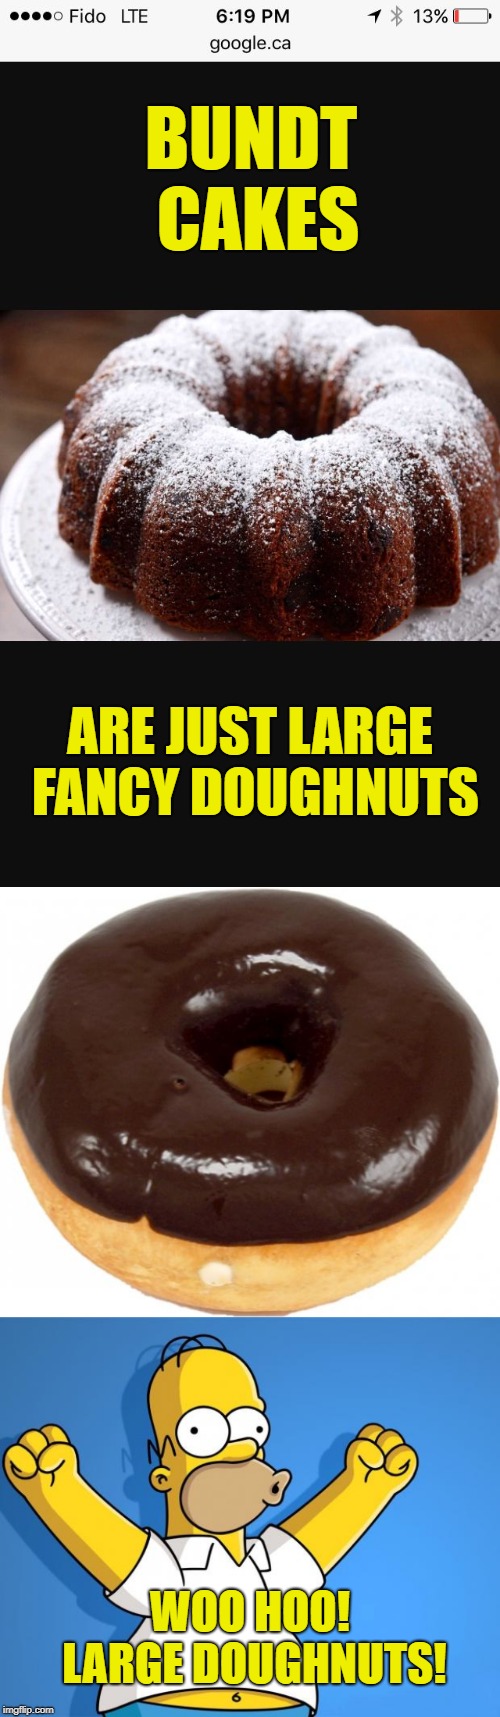 A doughnut by any other name, is just as sweet! | BUNDT CAKES; ARE JUST LARGE FANCY DOUGHNUTS; WOO HOO! LARGE DOUGHNUTS! | image tagged in woohoo homer simpson,chocolate doughnut,bundt cake,memes,mmm,yummy | made w/ Imgflip meme maker